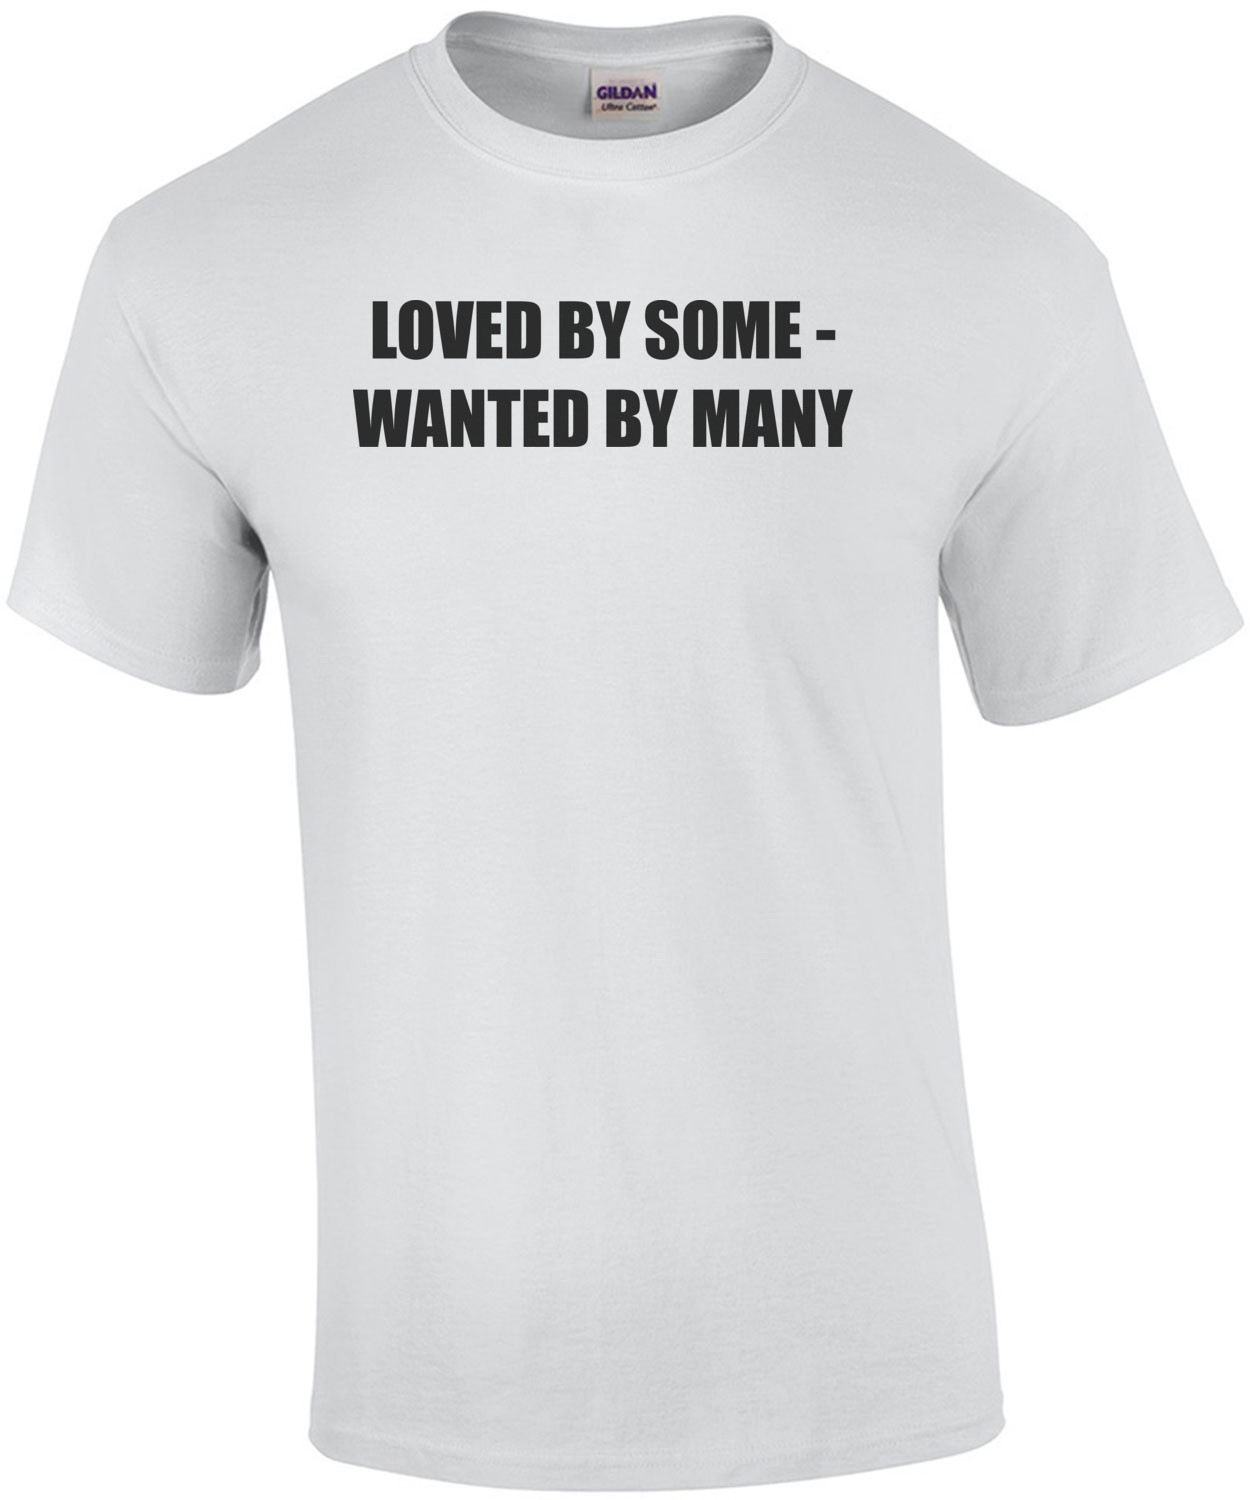 LOVED BY SOME - WANTED BY MANY Shirt